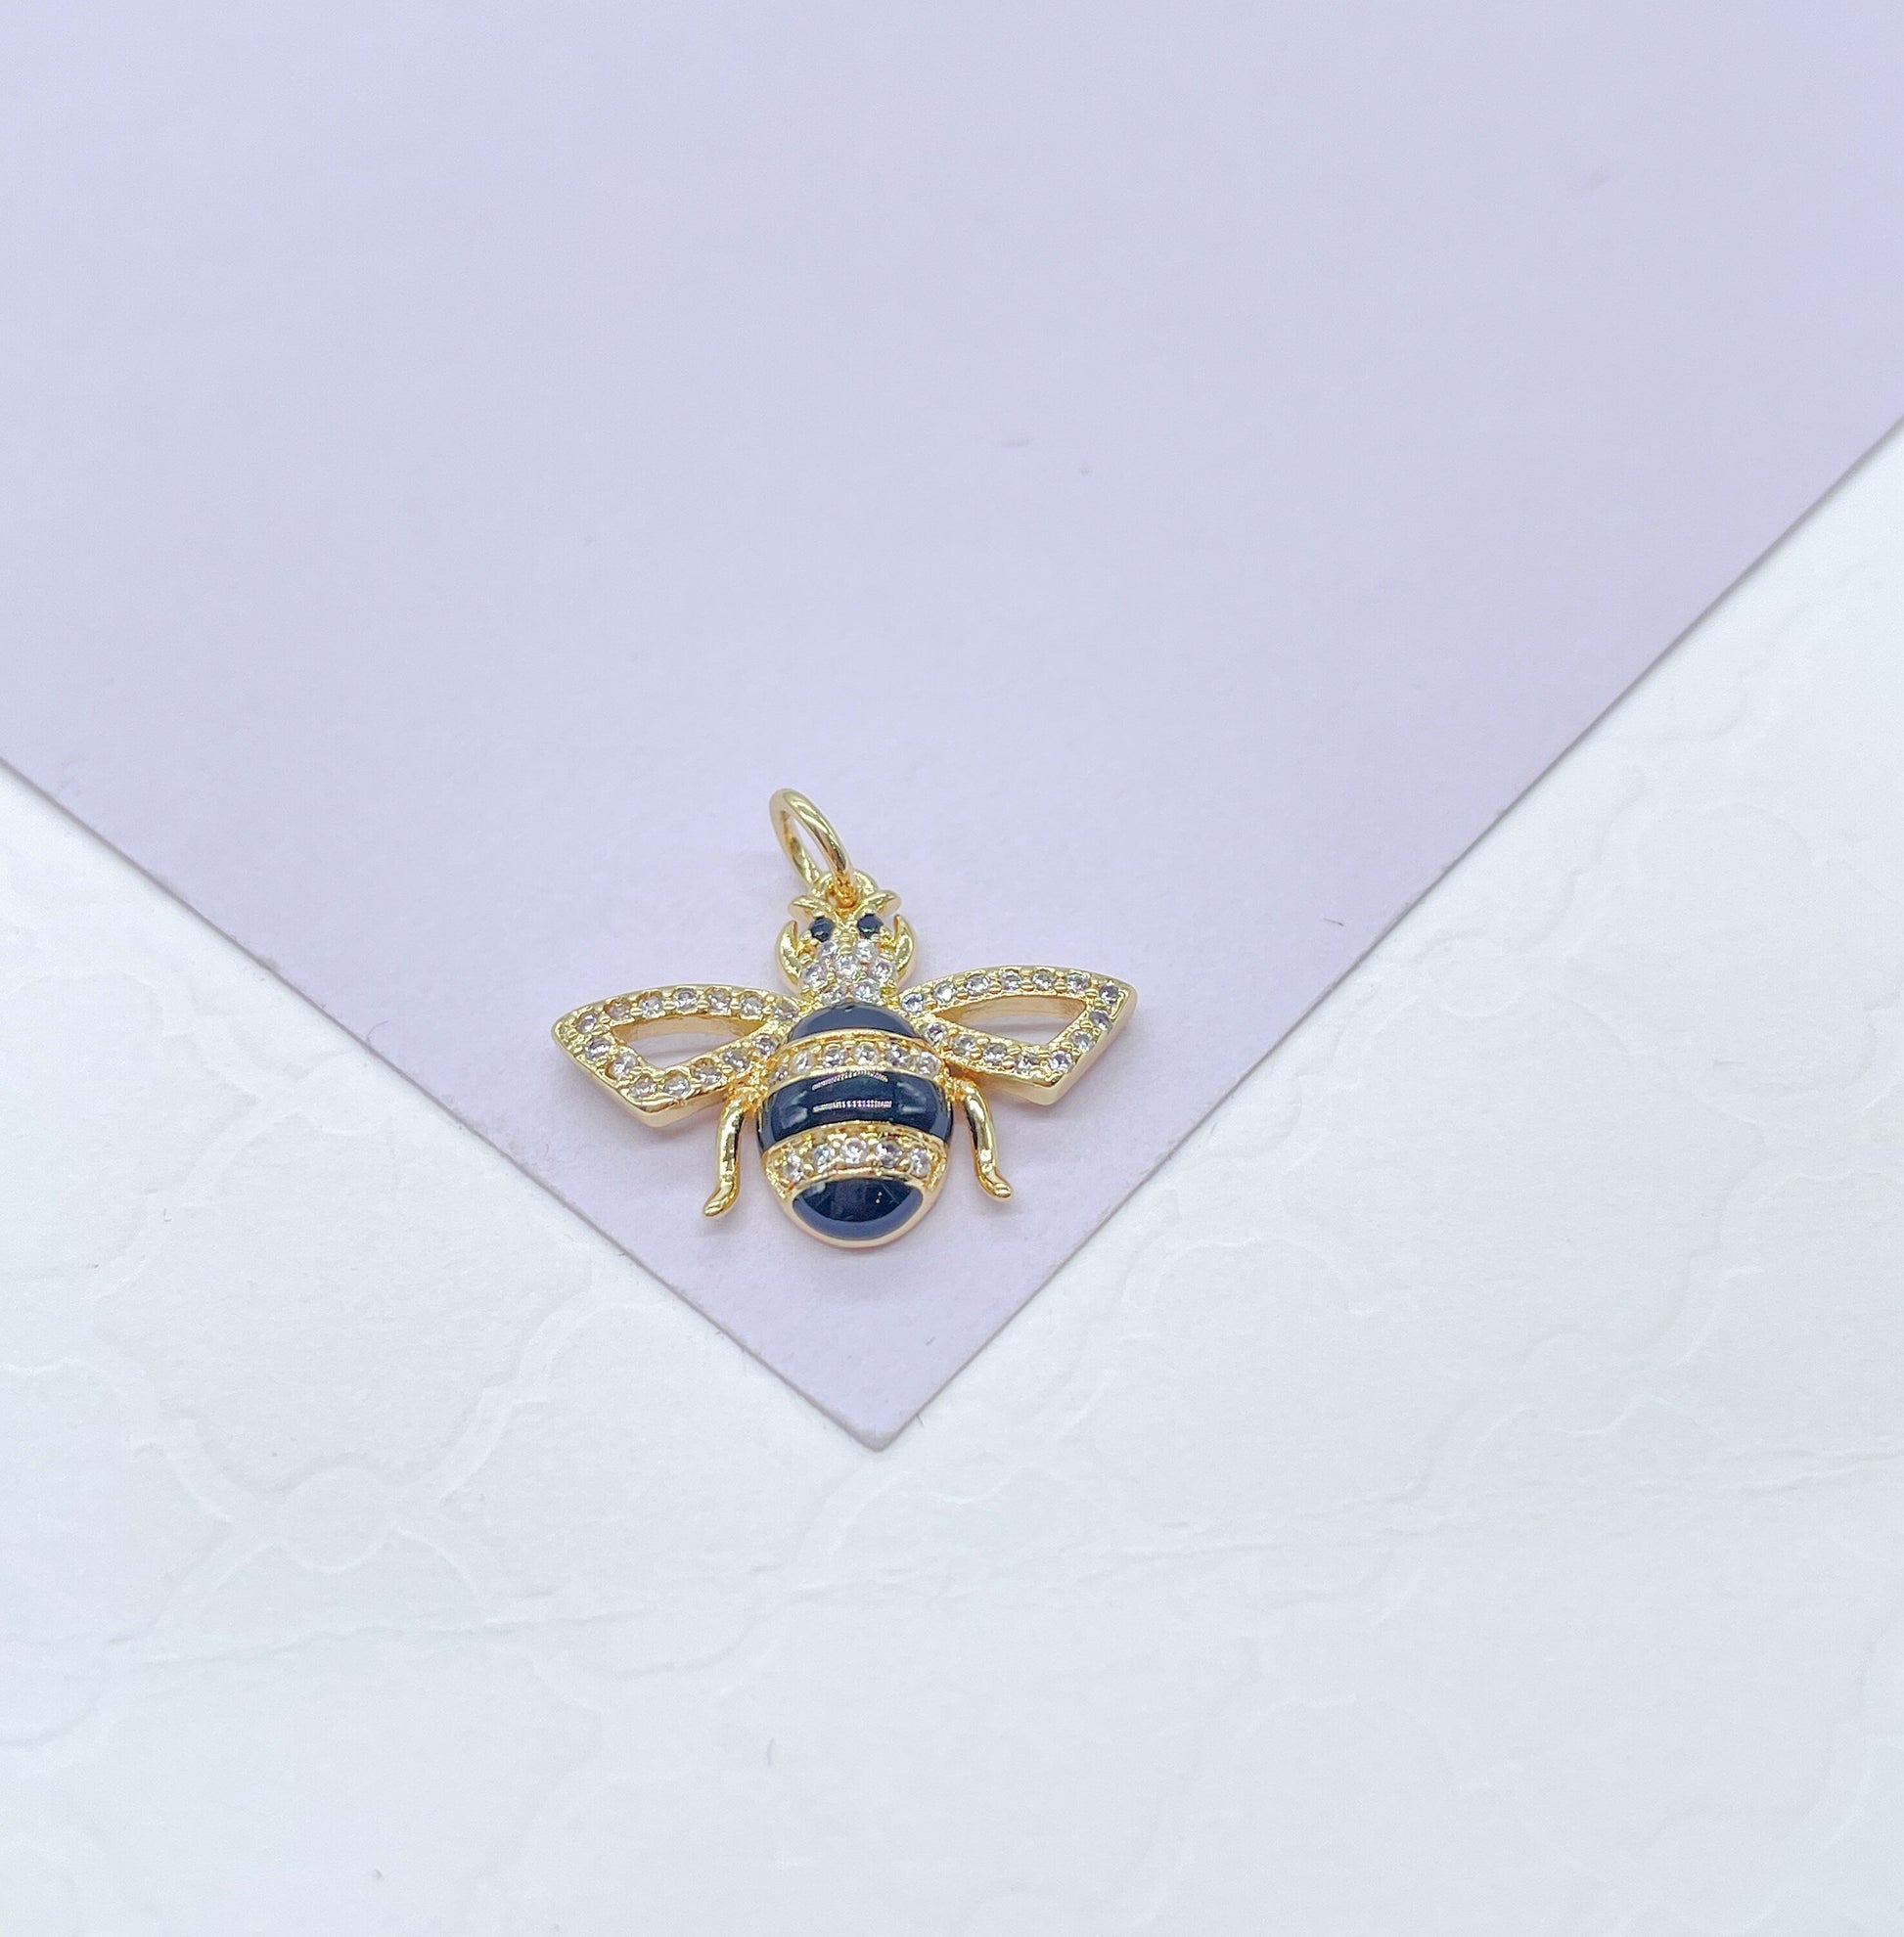 18k Gold Filled Black Stripe & All Gold Bee Pendant Both with White Pave Stones